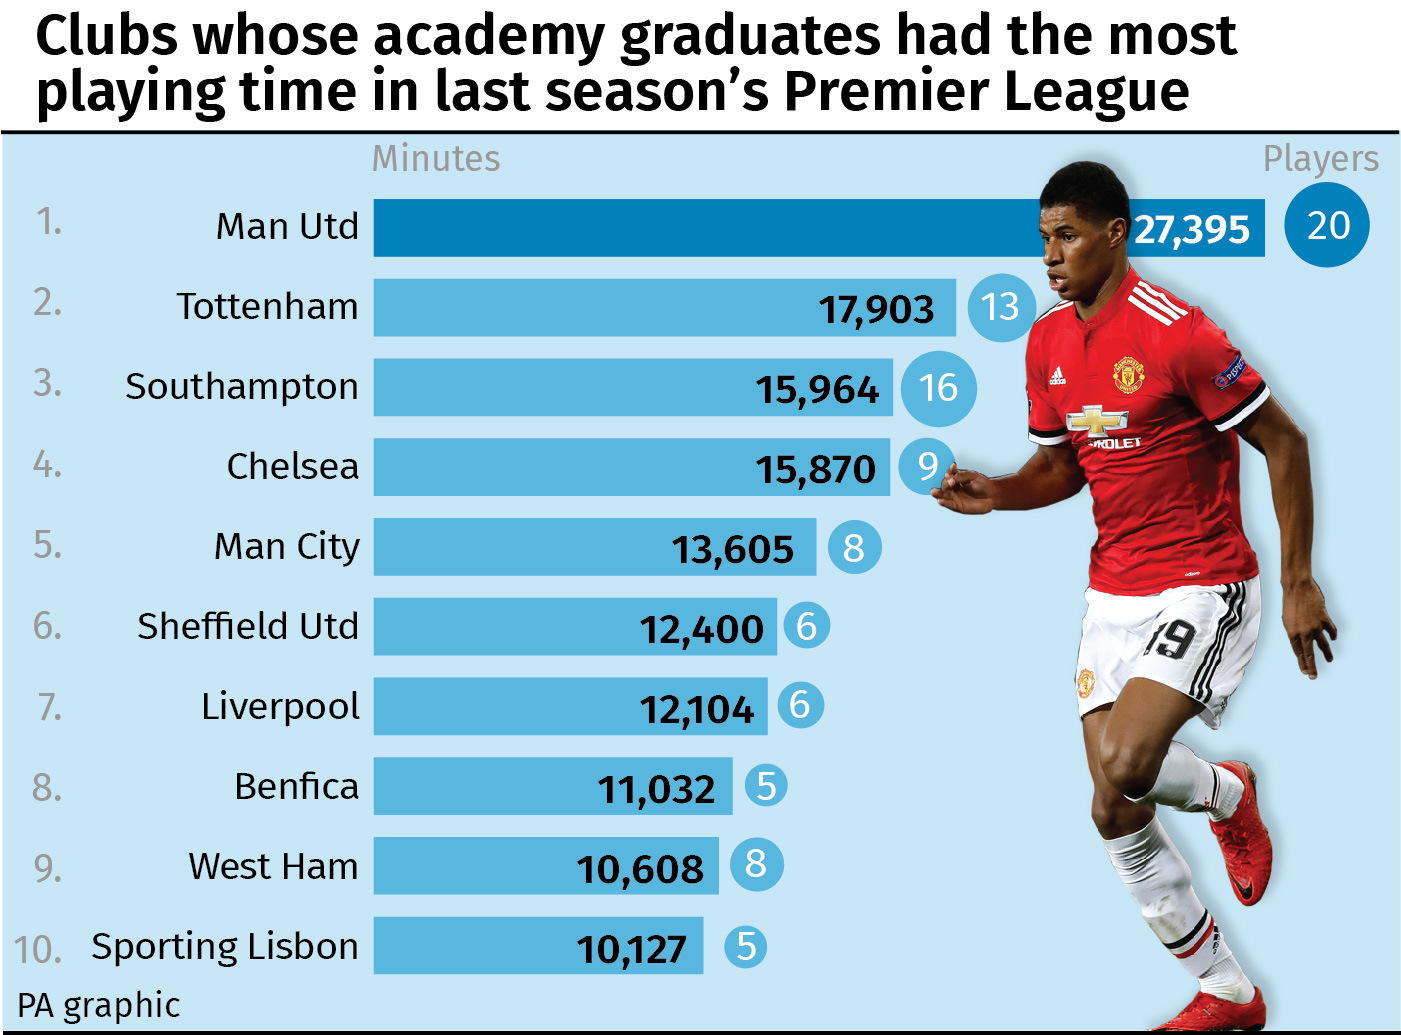 Clubs whose academy graduates had most playing time in last season's Premier League